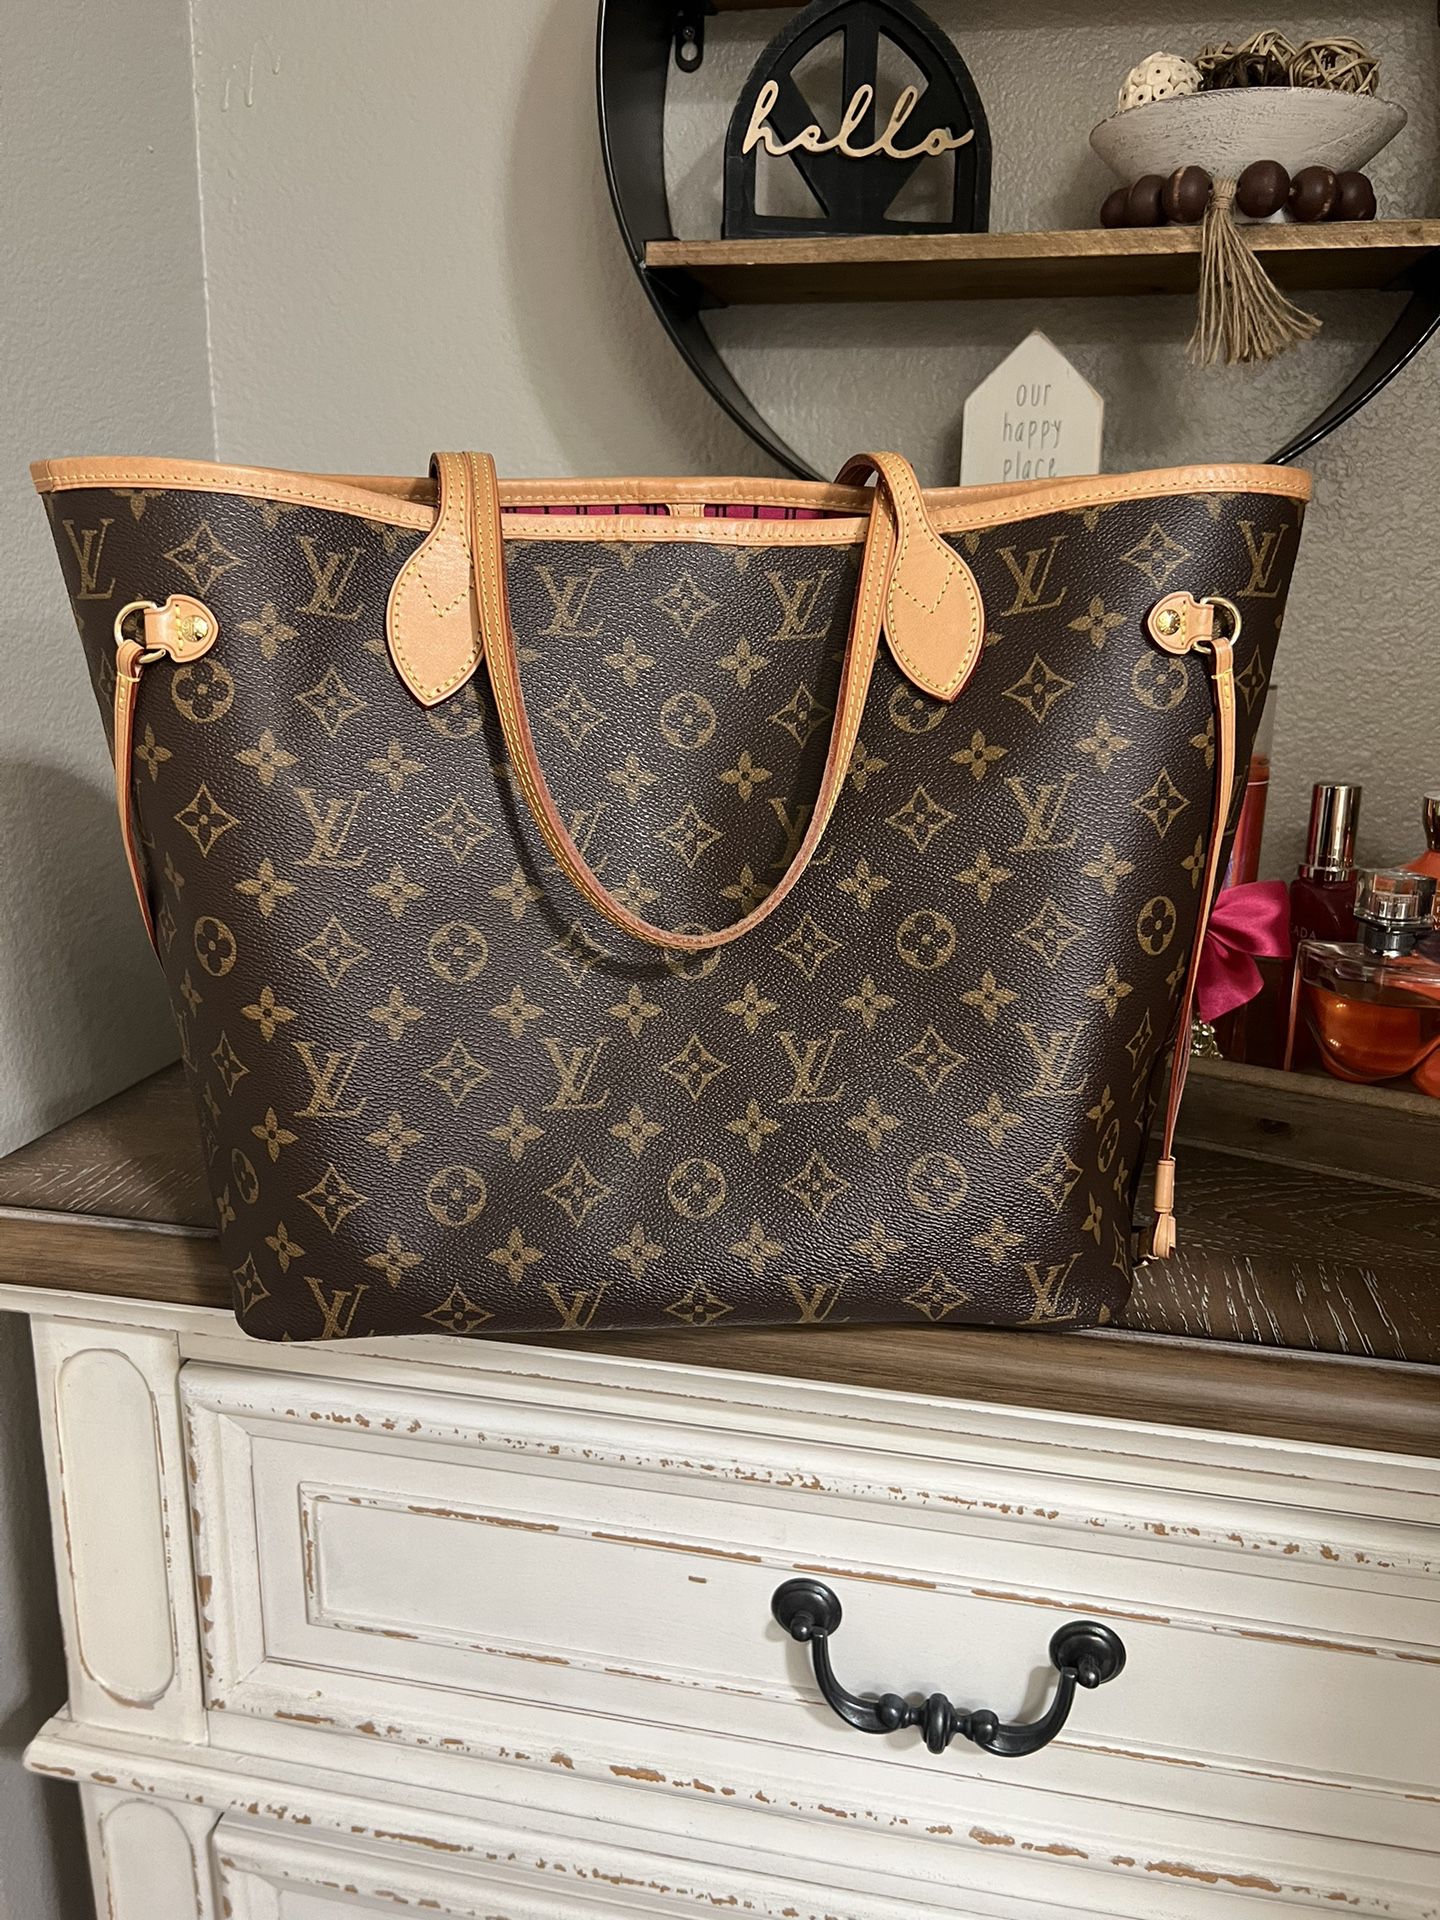 Louis Vuitton Neverfull Bags for sale in Seaside, California